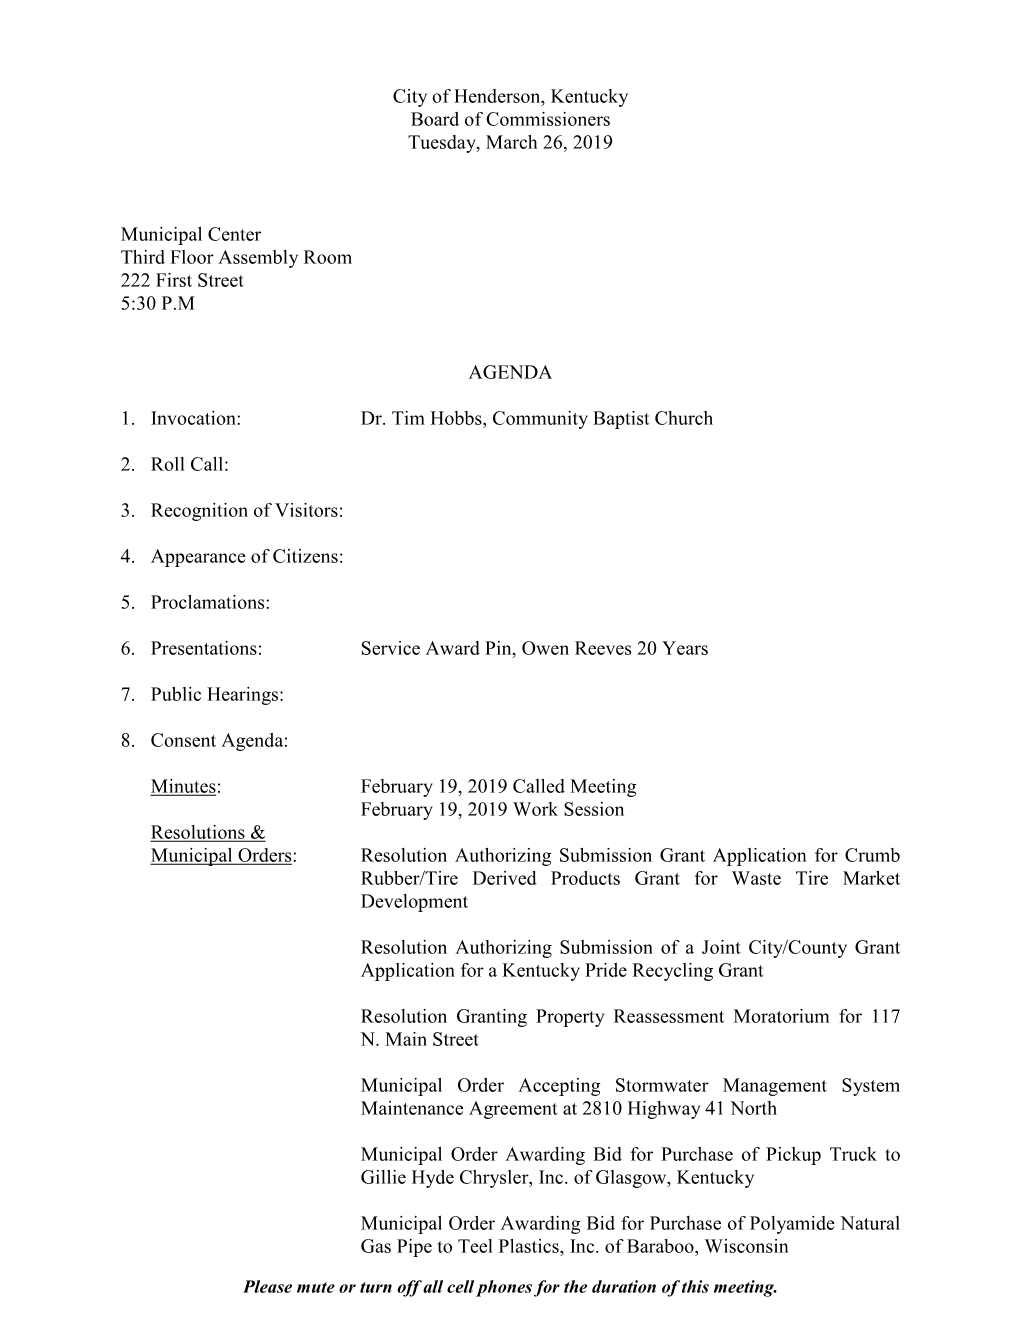 City of Henderson, Kentucky Board of Commissioners Tuesday, March 26, 2019